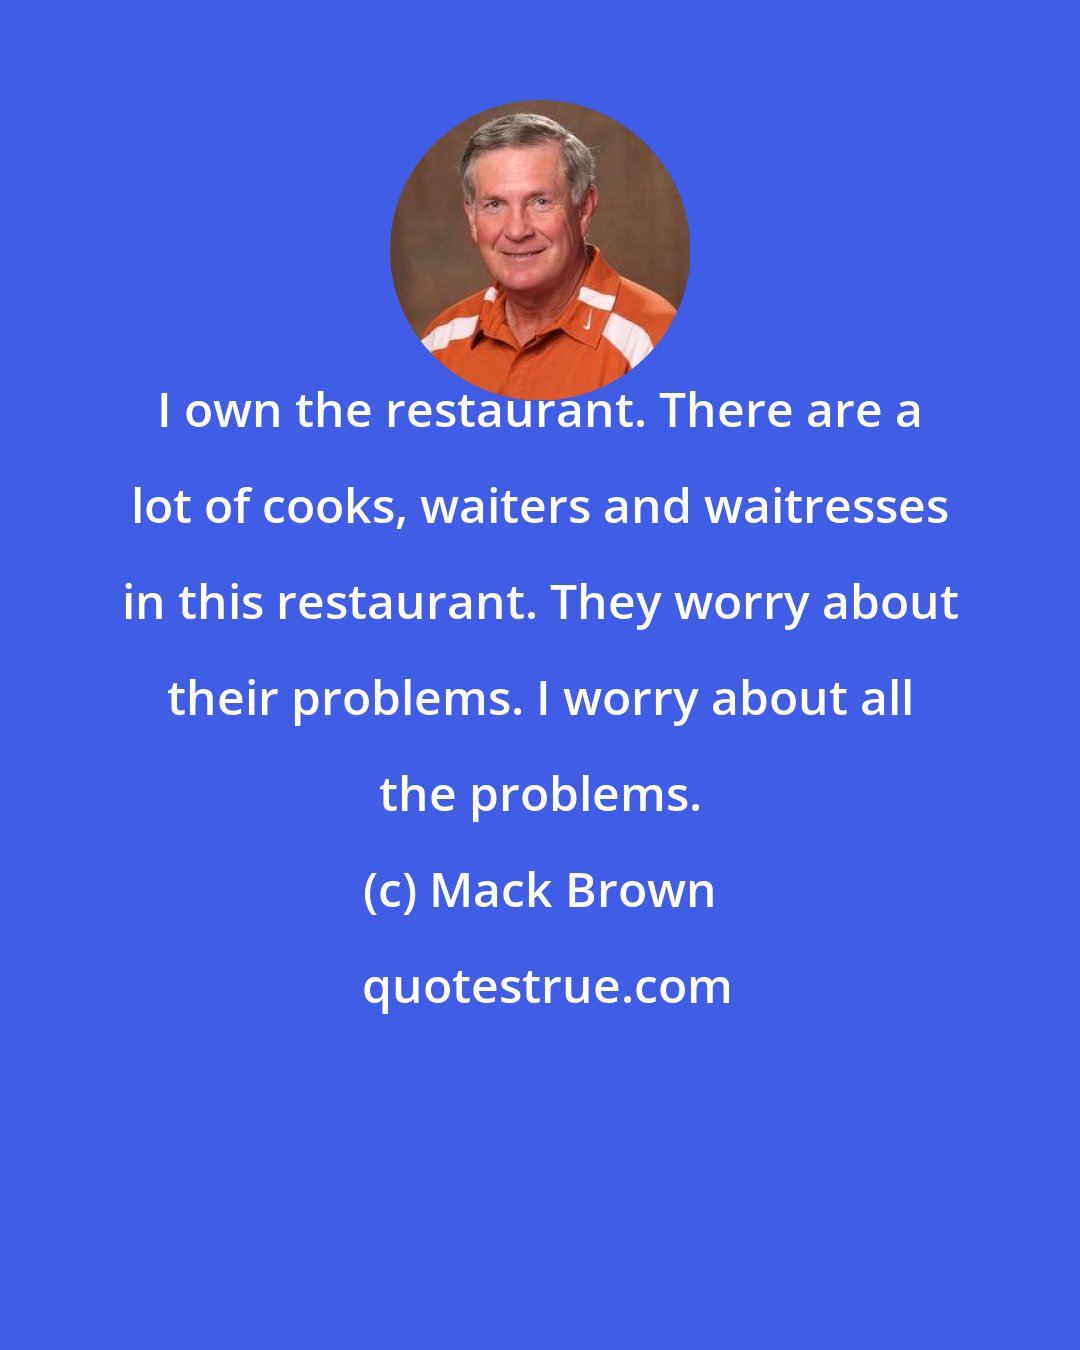 Mack Brown: I own the restaurant. There are a lot of cooks, waiters and waitresses in this restaurant. They worry about their problems. I worry about all the problems.